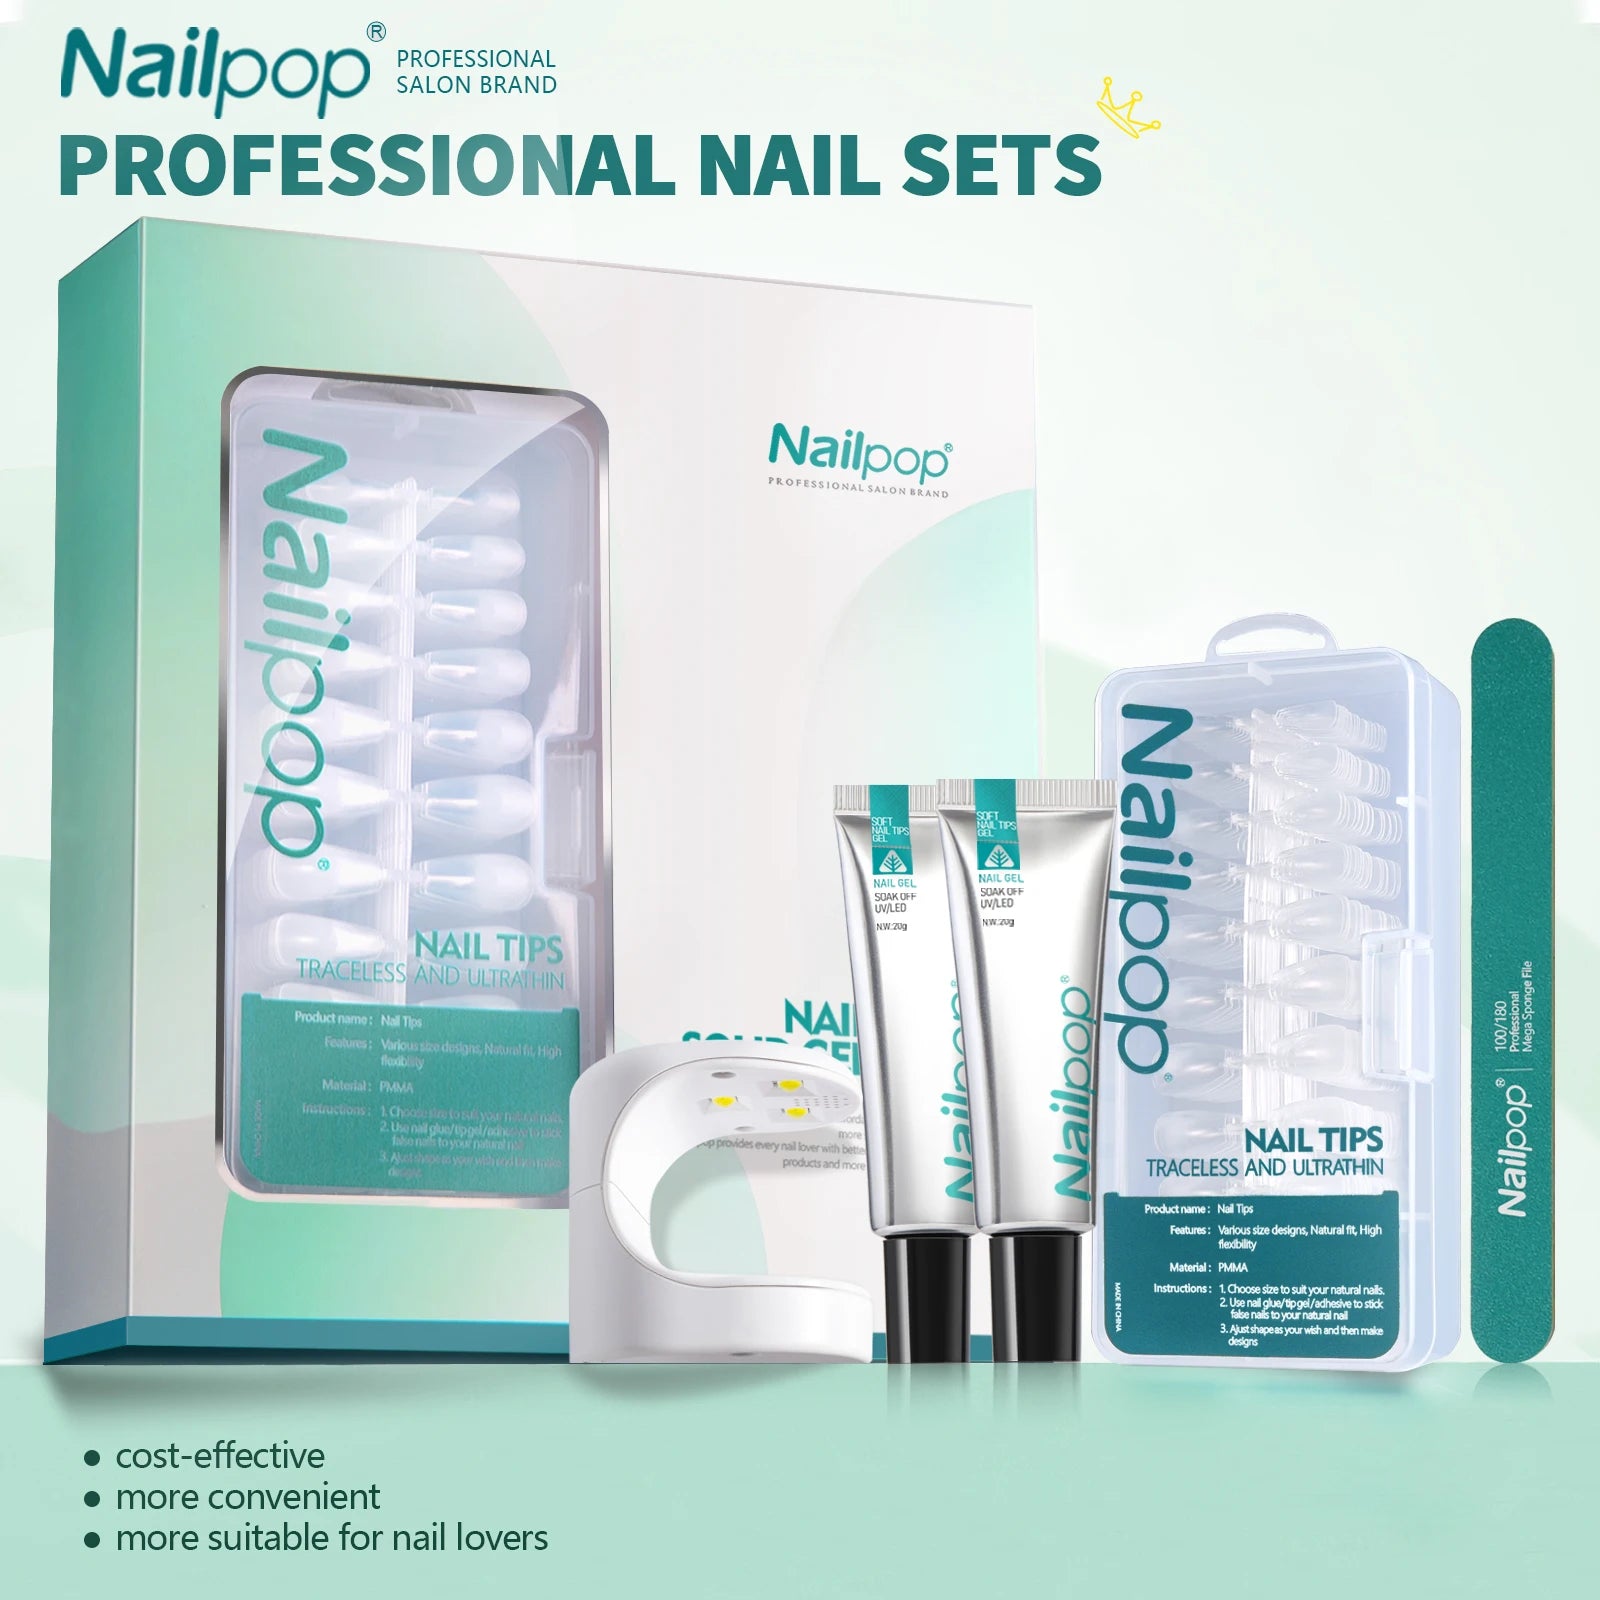 Product image showing Nailpop Nail Extension Kit with UV Lamp, including 600 pieces of Nail Tips, 2 Soft nail gel tubes, 1 UV Lamp, and 1 Nail File, suitable for Almond, Coffin, Square, and Stiletto nail shapes, ideal for acrylic nail extension and DIY nail art manicures.